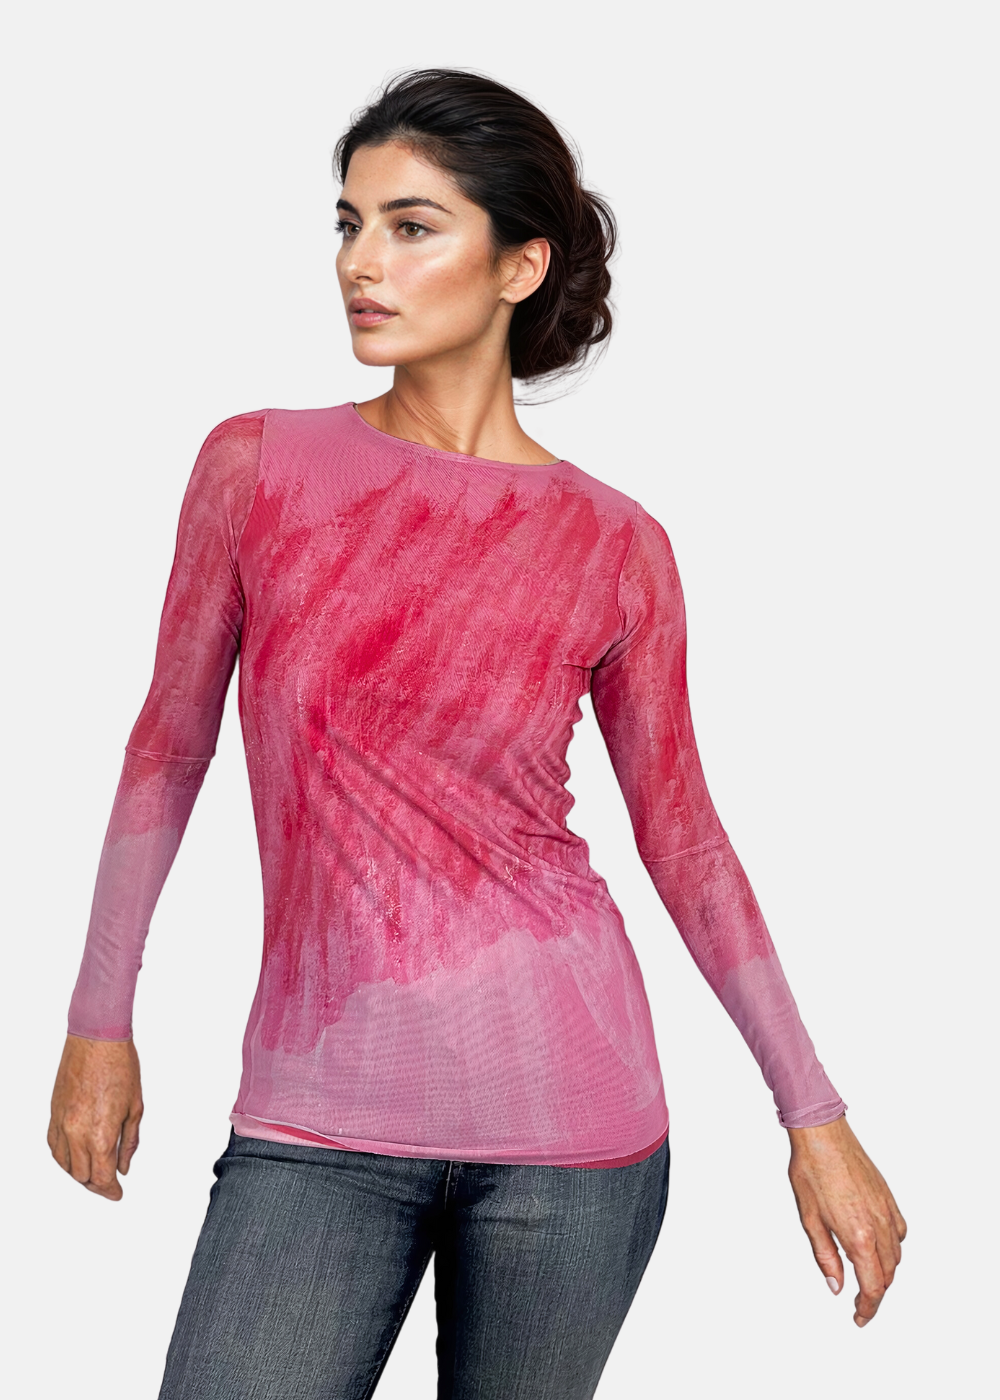 Pinky Promise - Florence Double Sheer Top